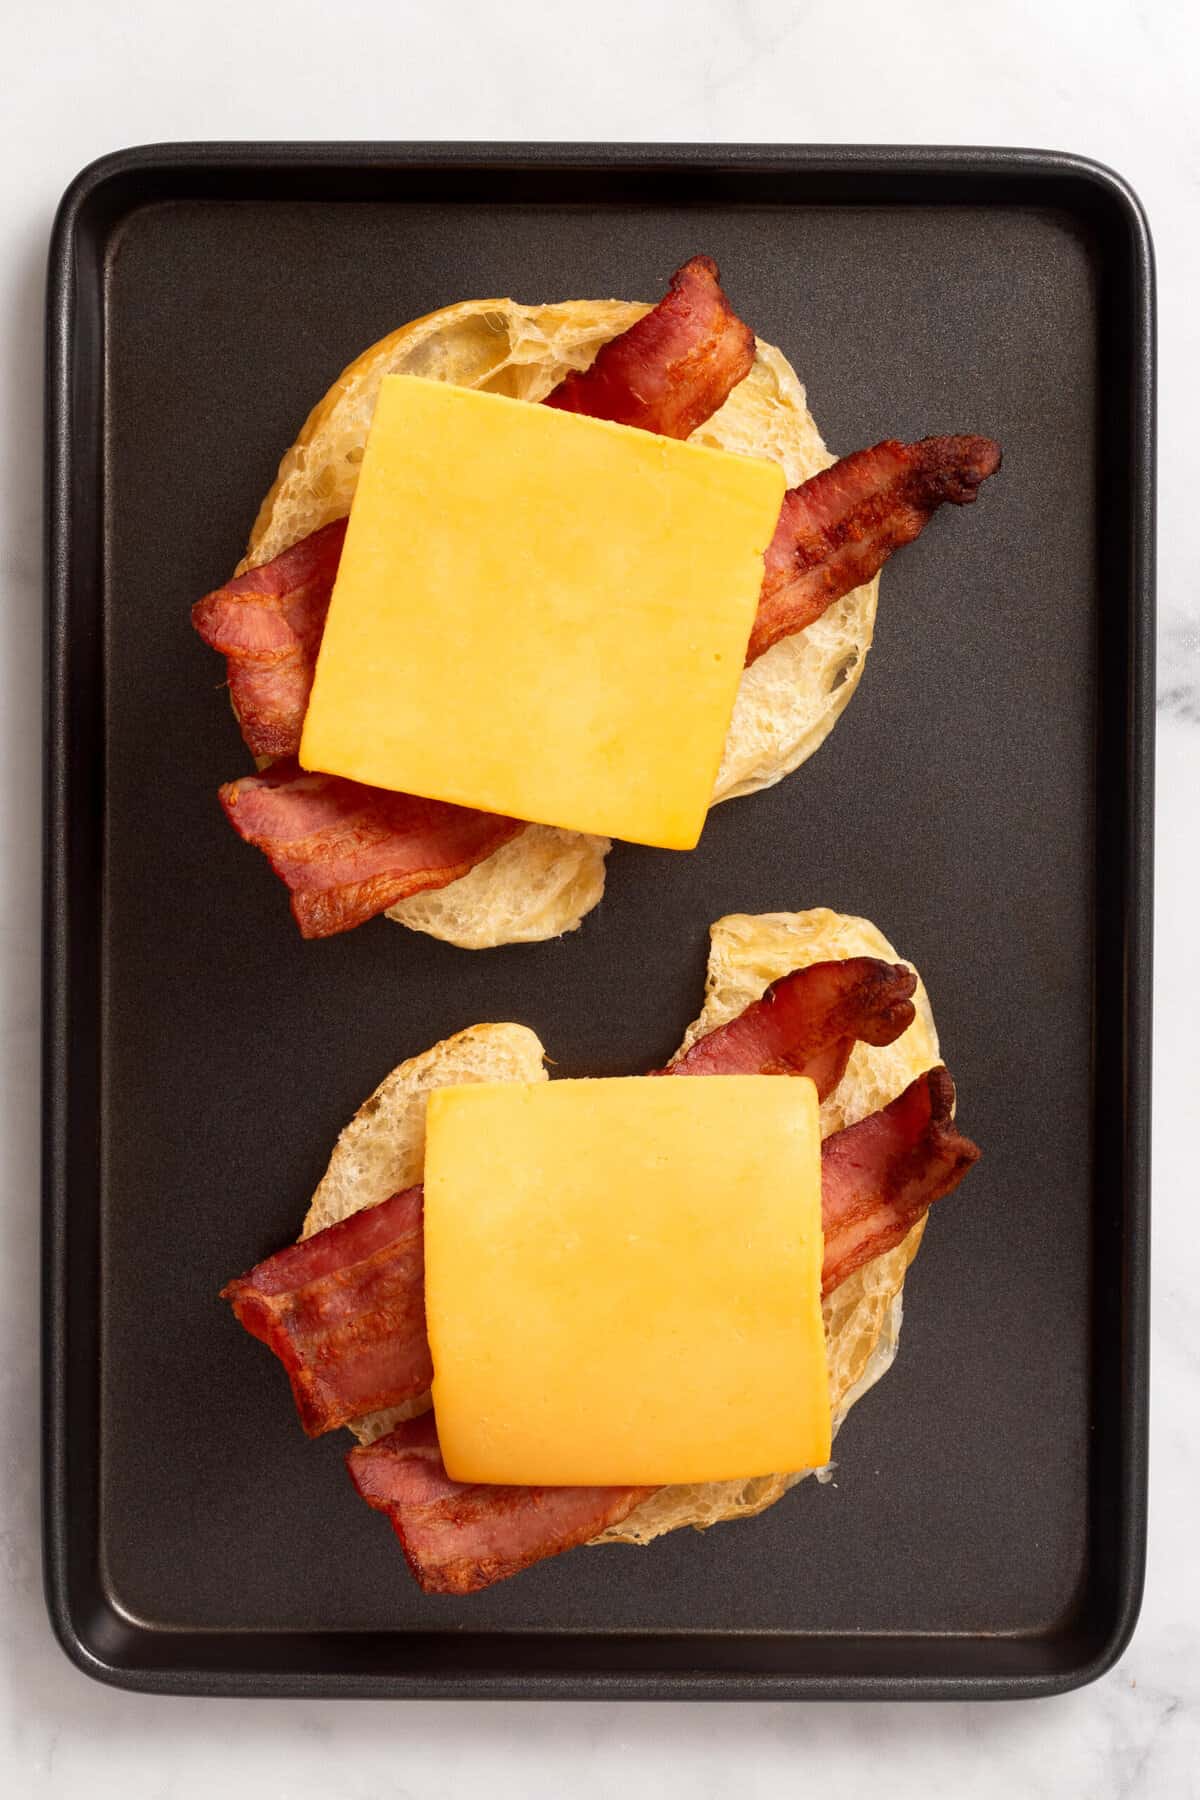 Top down image of a croissant, cut in half layered with two slices of bacon on each croissant, half and a slice of cheddar cheese on each half sitting on a baking tray.